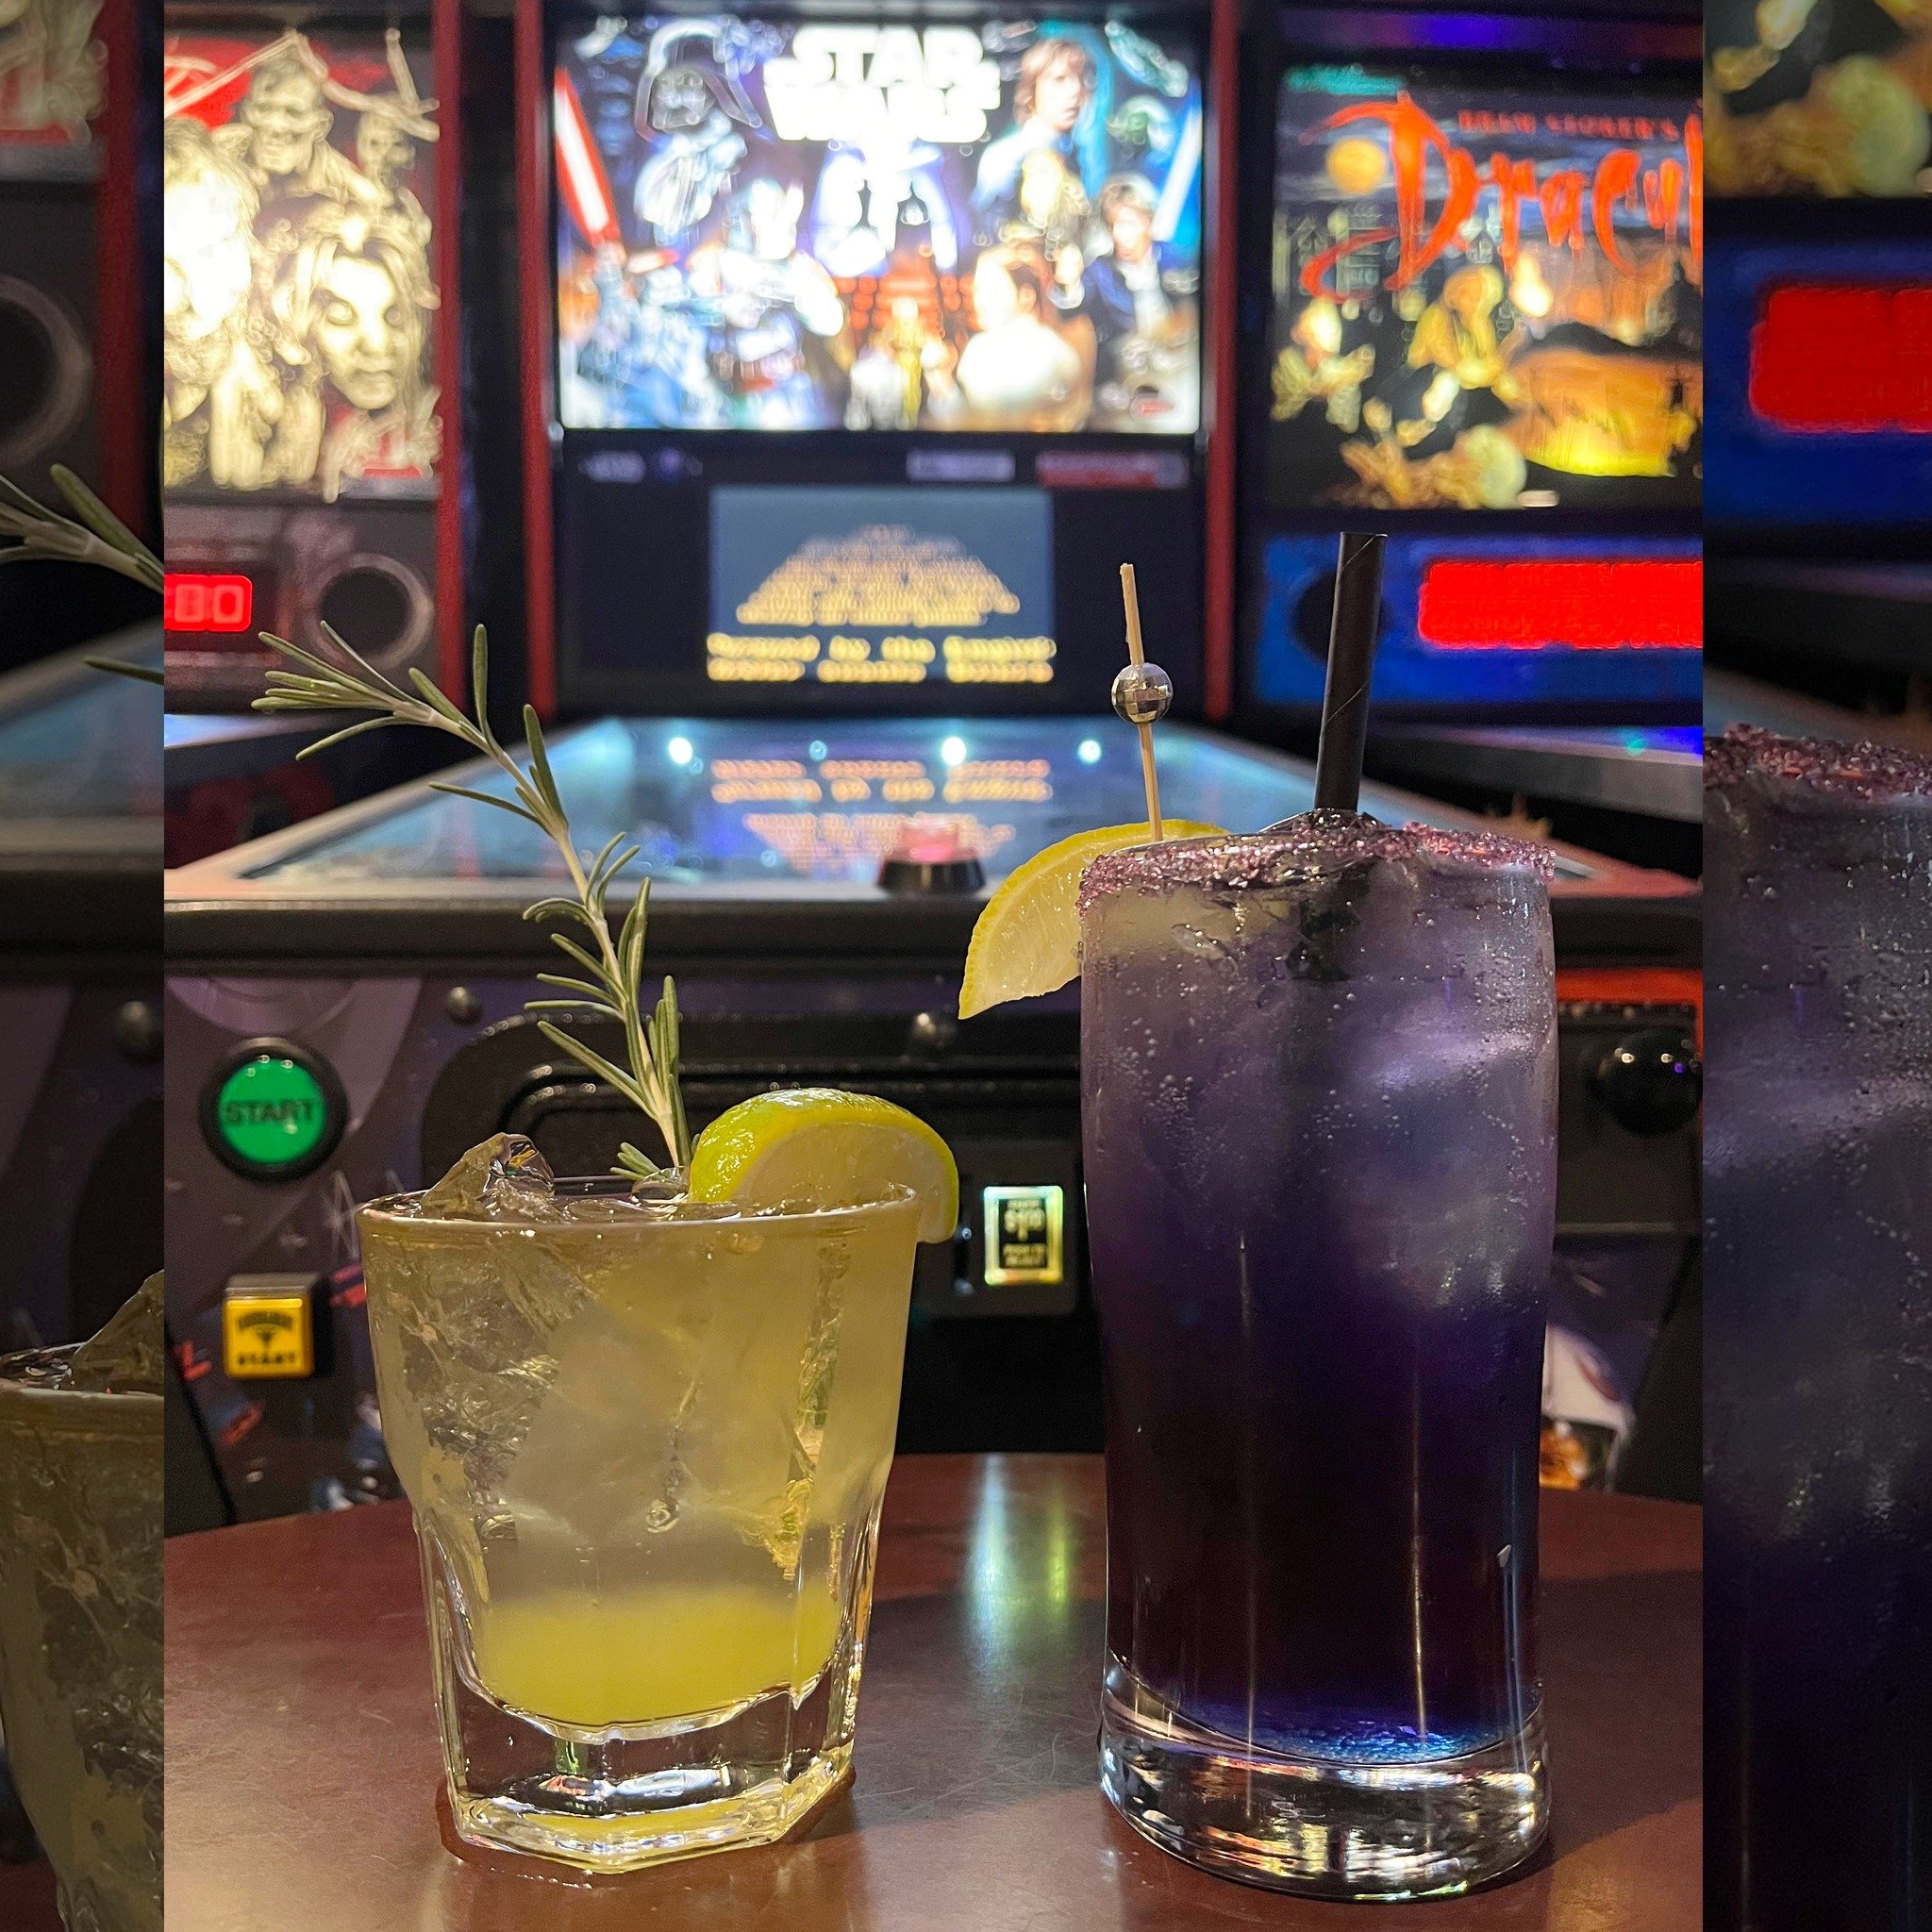 CELEBRATE STAR WARS DAY at TARG!!
SAT MAY 4th - 9pm | 19+ 
Our Wizard Droids have mixed up a selection of cocktails to delight supporters of both the Rebel Alliance and the Galactic Empire. Choose your allegiance... &amp; try a Death Star or a Luke R